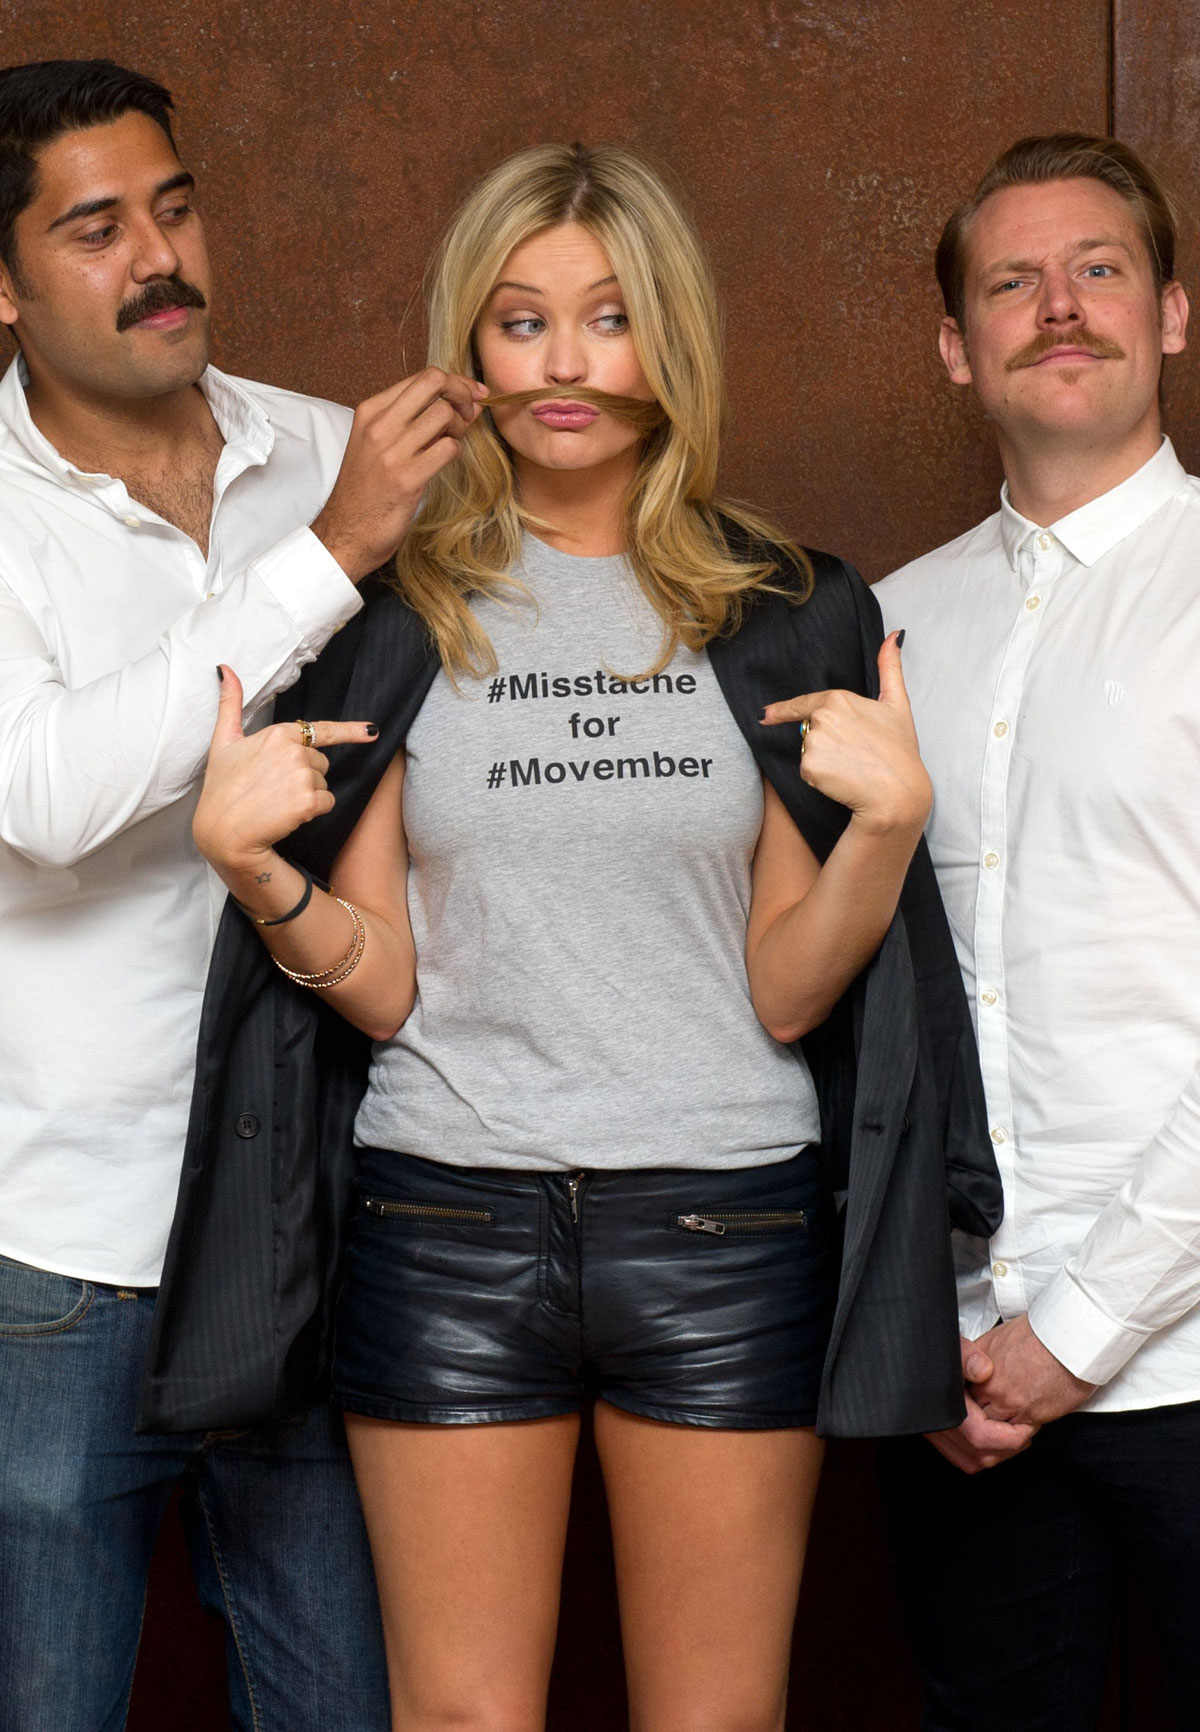 Laura Whitmore poses for Aussie’s ‘Misstache for Movember’ Campaign